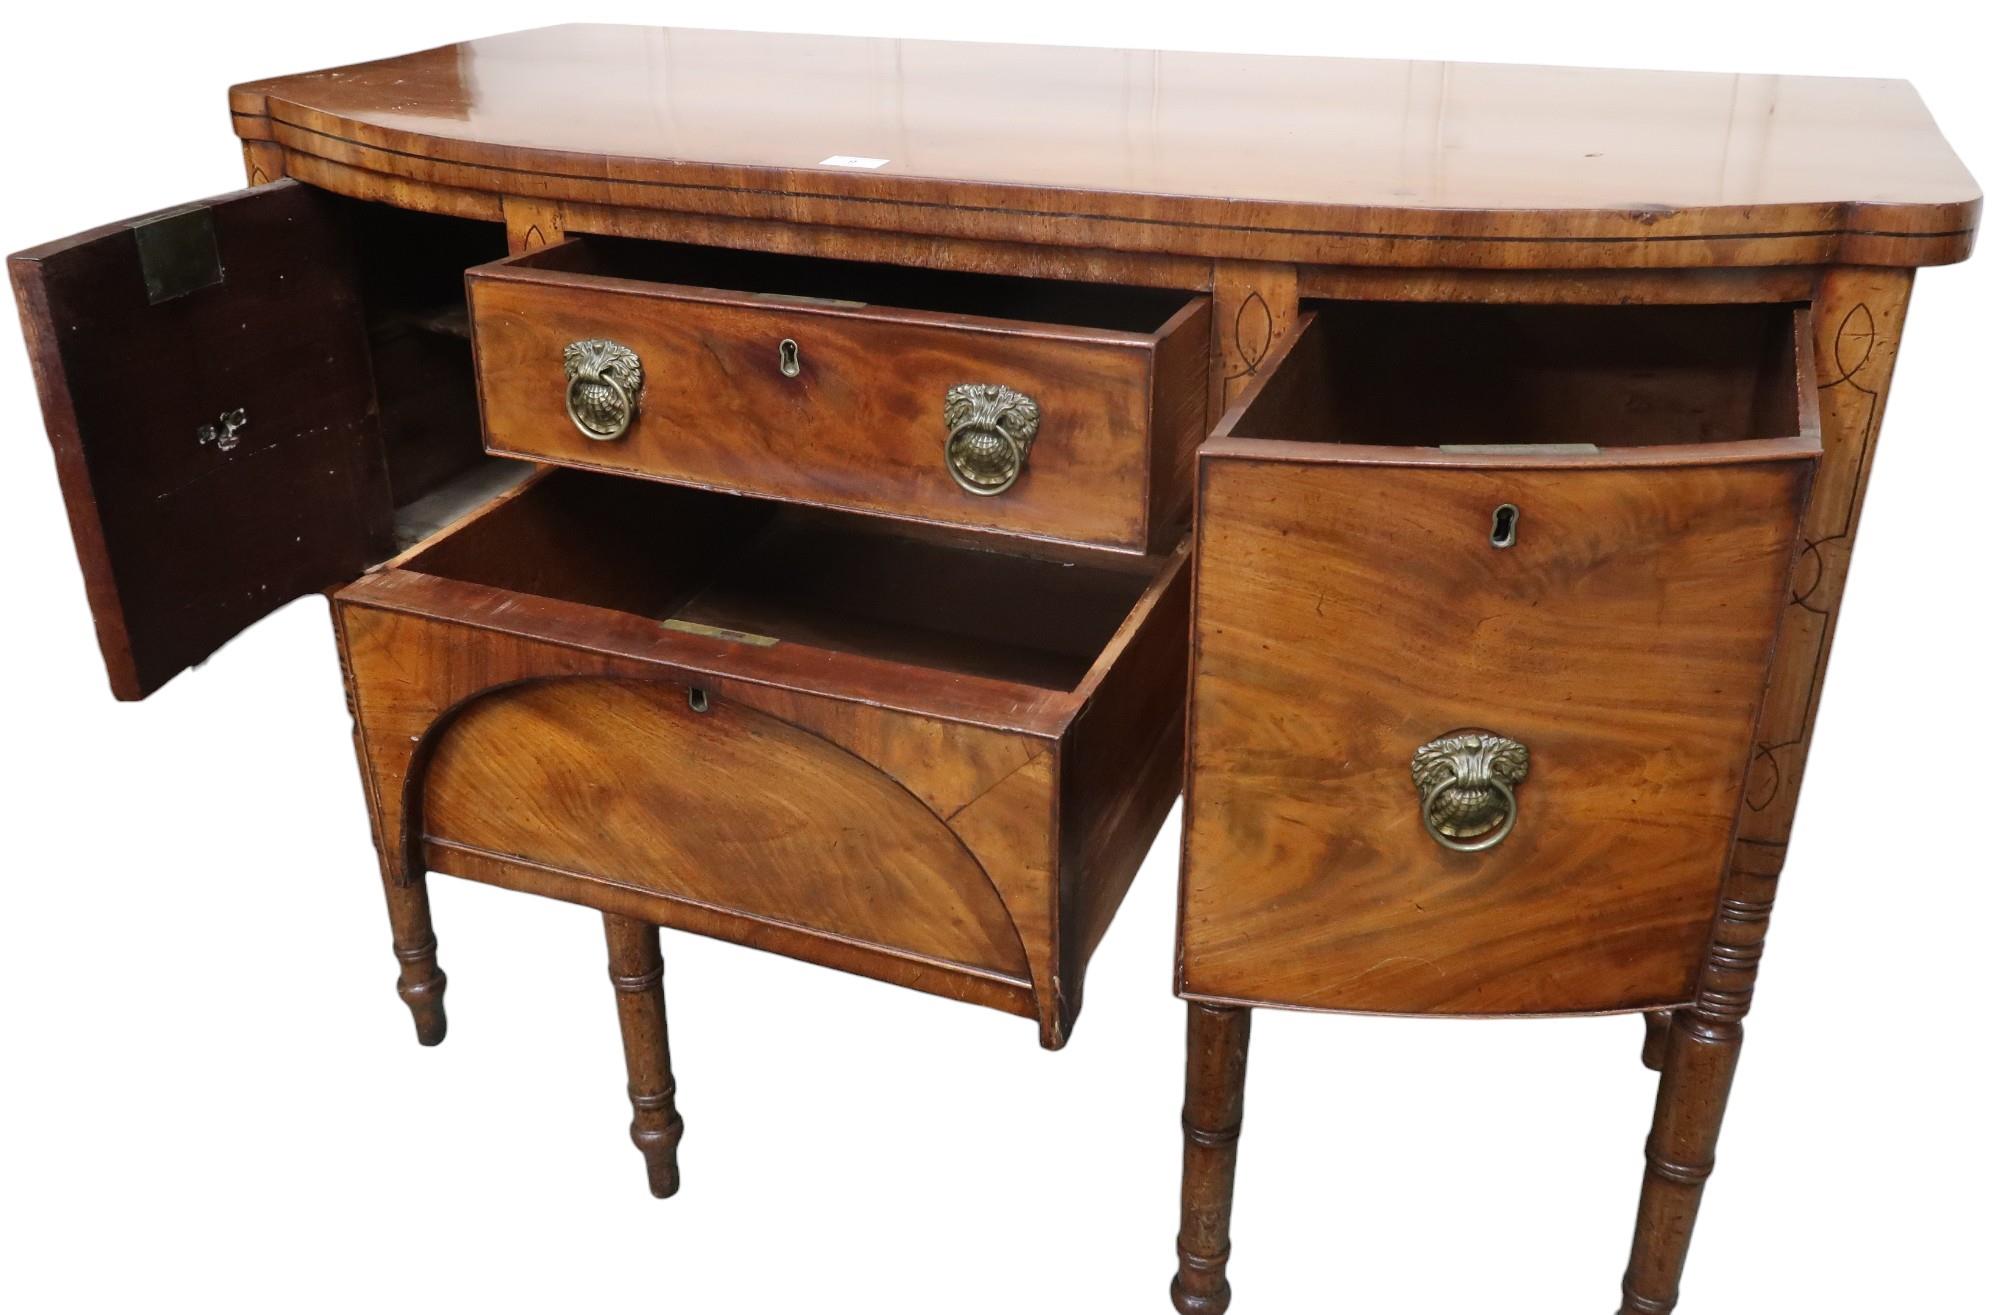 A 19th century mahogany bowfront sideboard with two central drawers flanked by bowed doors with - Image 3 of 3